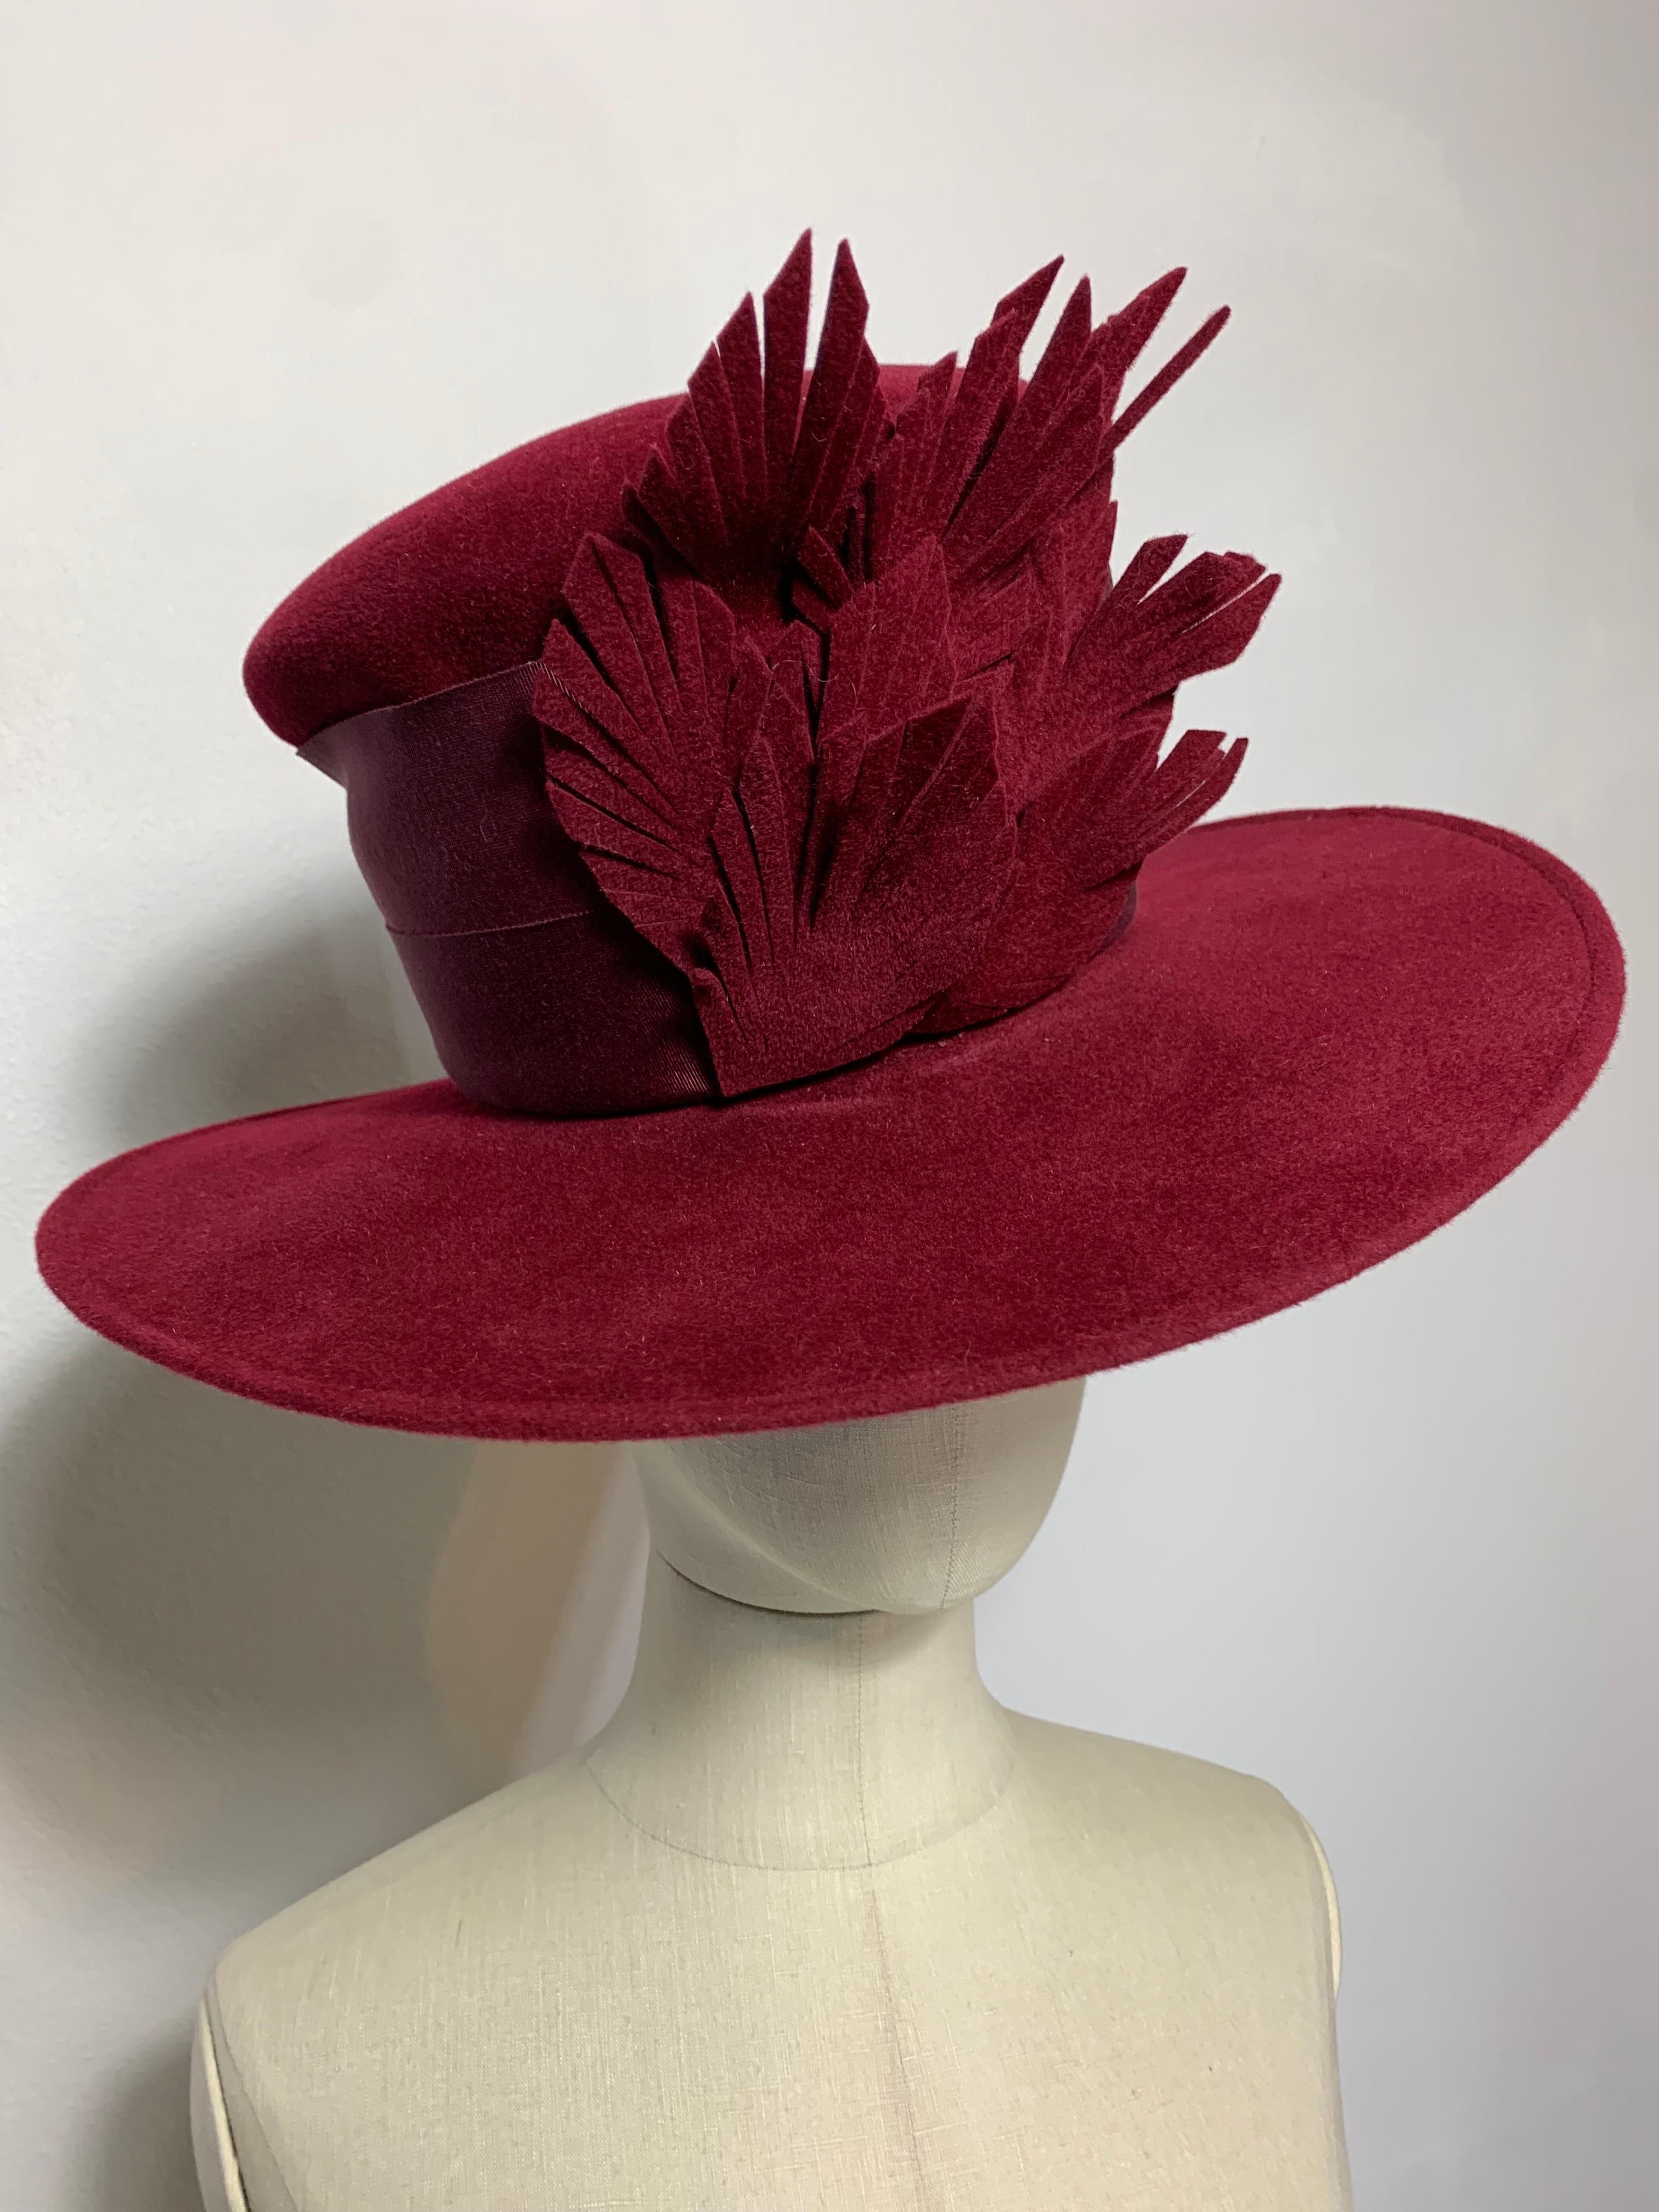 Maison Michel Autumn/Winter Beautifully Blocked Medium Brim Maroon Felt High Top Hat with Matching Leaf Spray and Wide Grosgrain Band: Unlabeled, with attached combs for securing. Size 7 1/4 Medium. Made in France. 

Please visit our 1stDibs Store